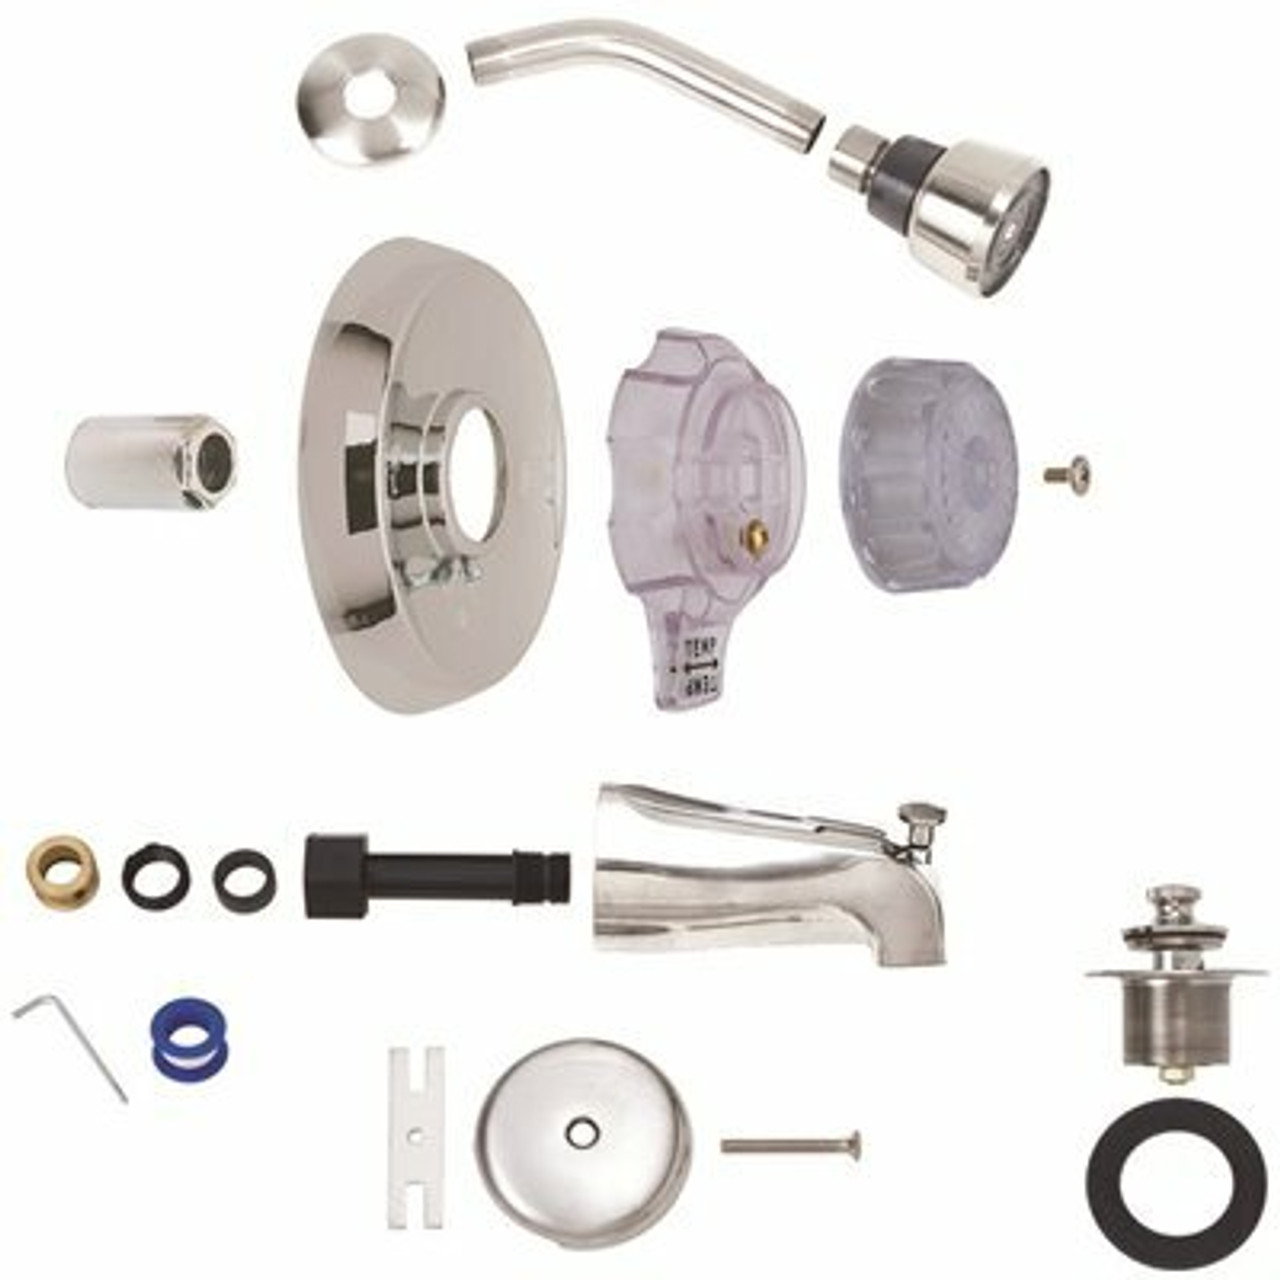 Brasscraft 1-Handle Tub And Shower Faucet Trim Kit For Mixet Non-Pressure Balanced Valves In Chrome (Valve Not Included) - 125023